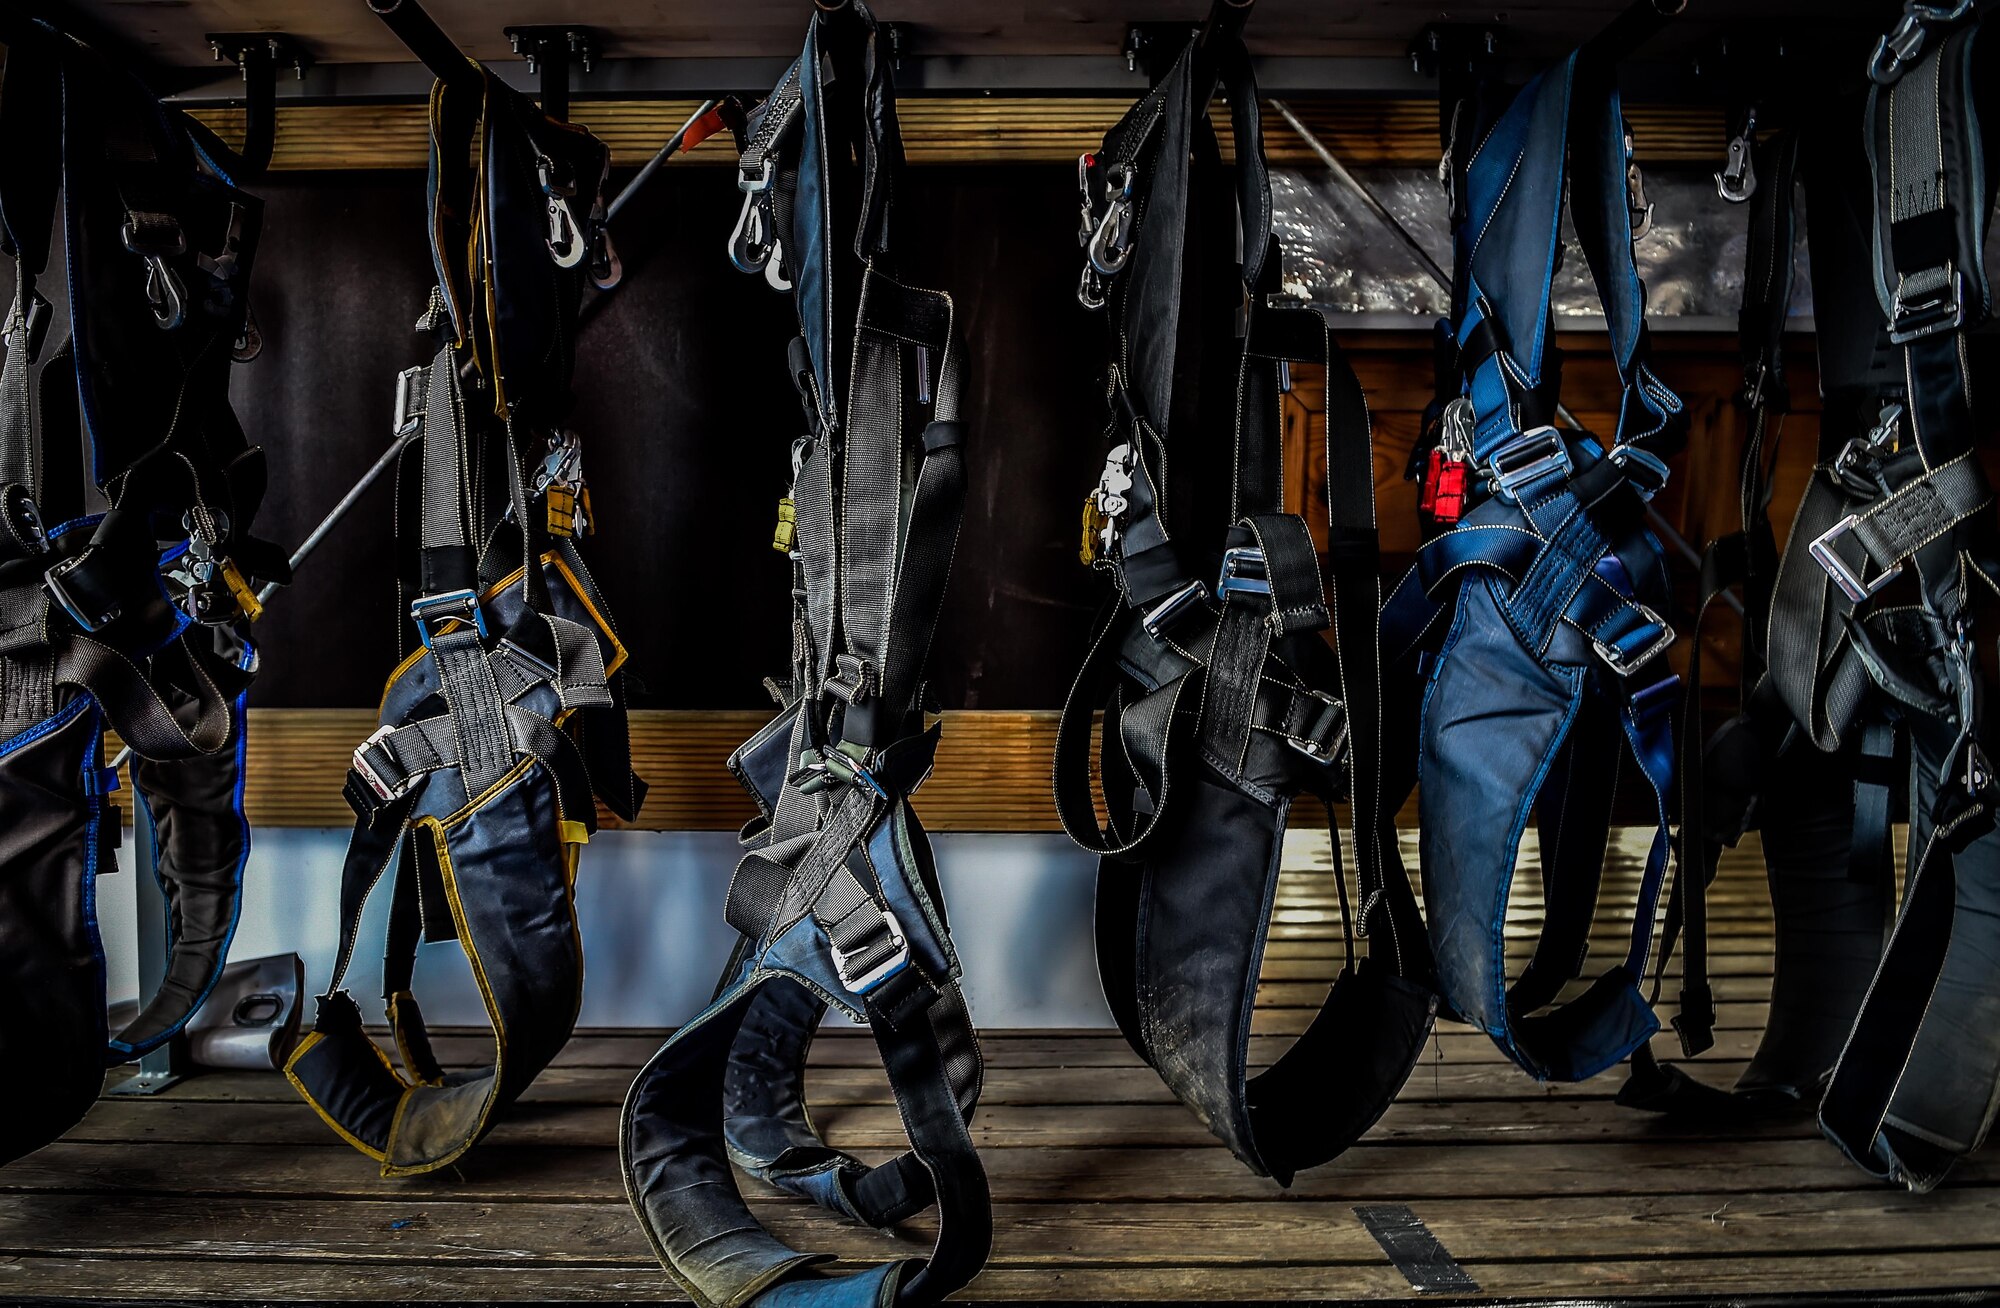 Skydiving harnesses hang on a rack in Wallerfangen, Germany, Aug. 13, 2016. The 86th Airlift Wing Chapel and Club 7 gave 15 Airmen from Ramstein Air Base, Germany, the opportunity to take a ‘leap of faith’ during a skydiving trip to build upon the pillars of RUfit. (U.S. Air Force photo/Senior Airman Nicole Keim)